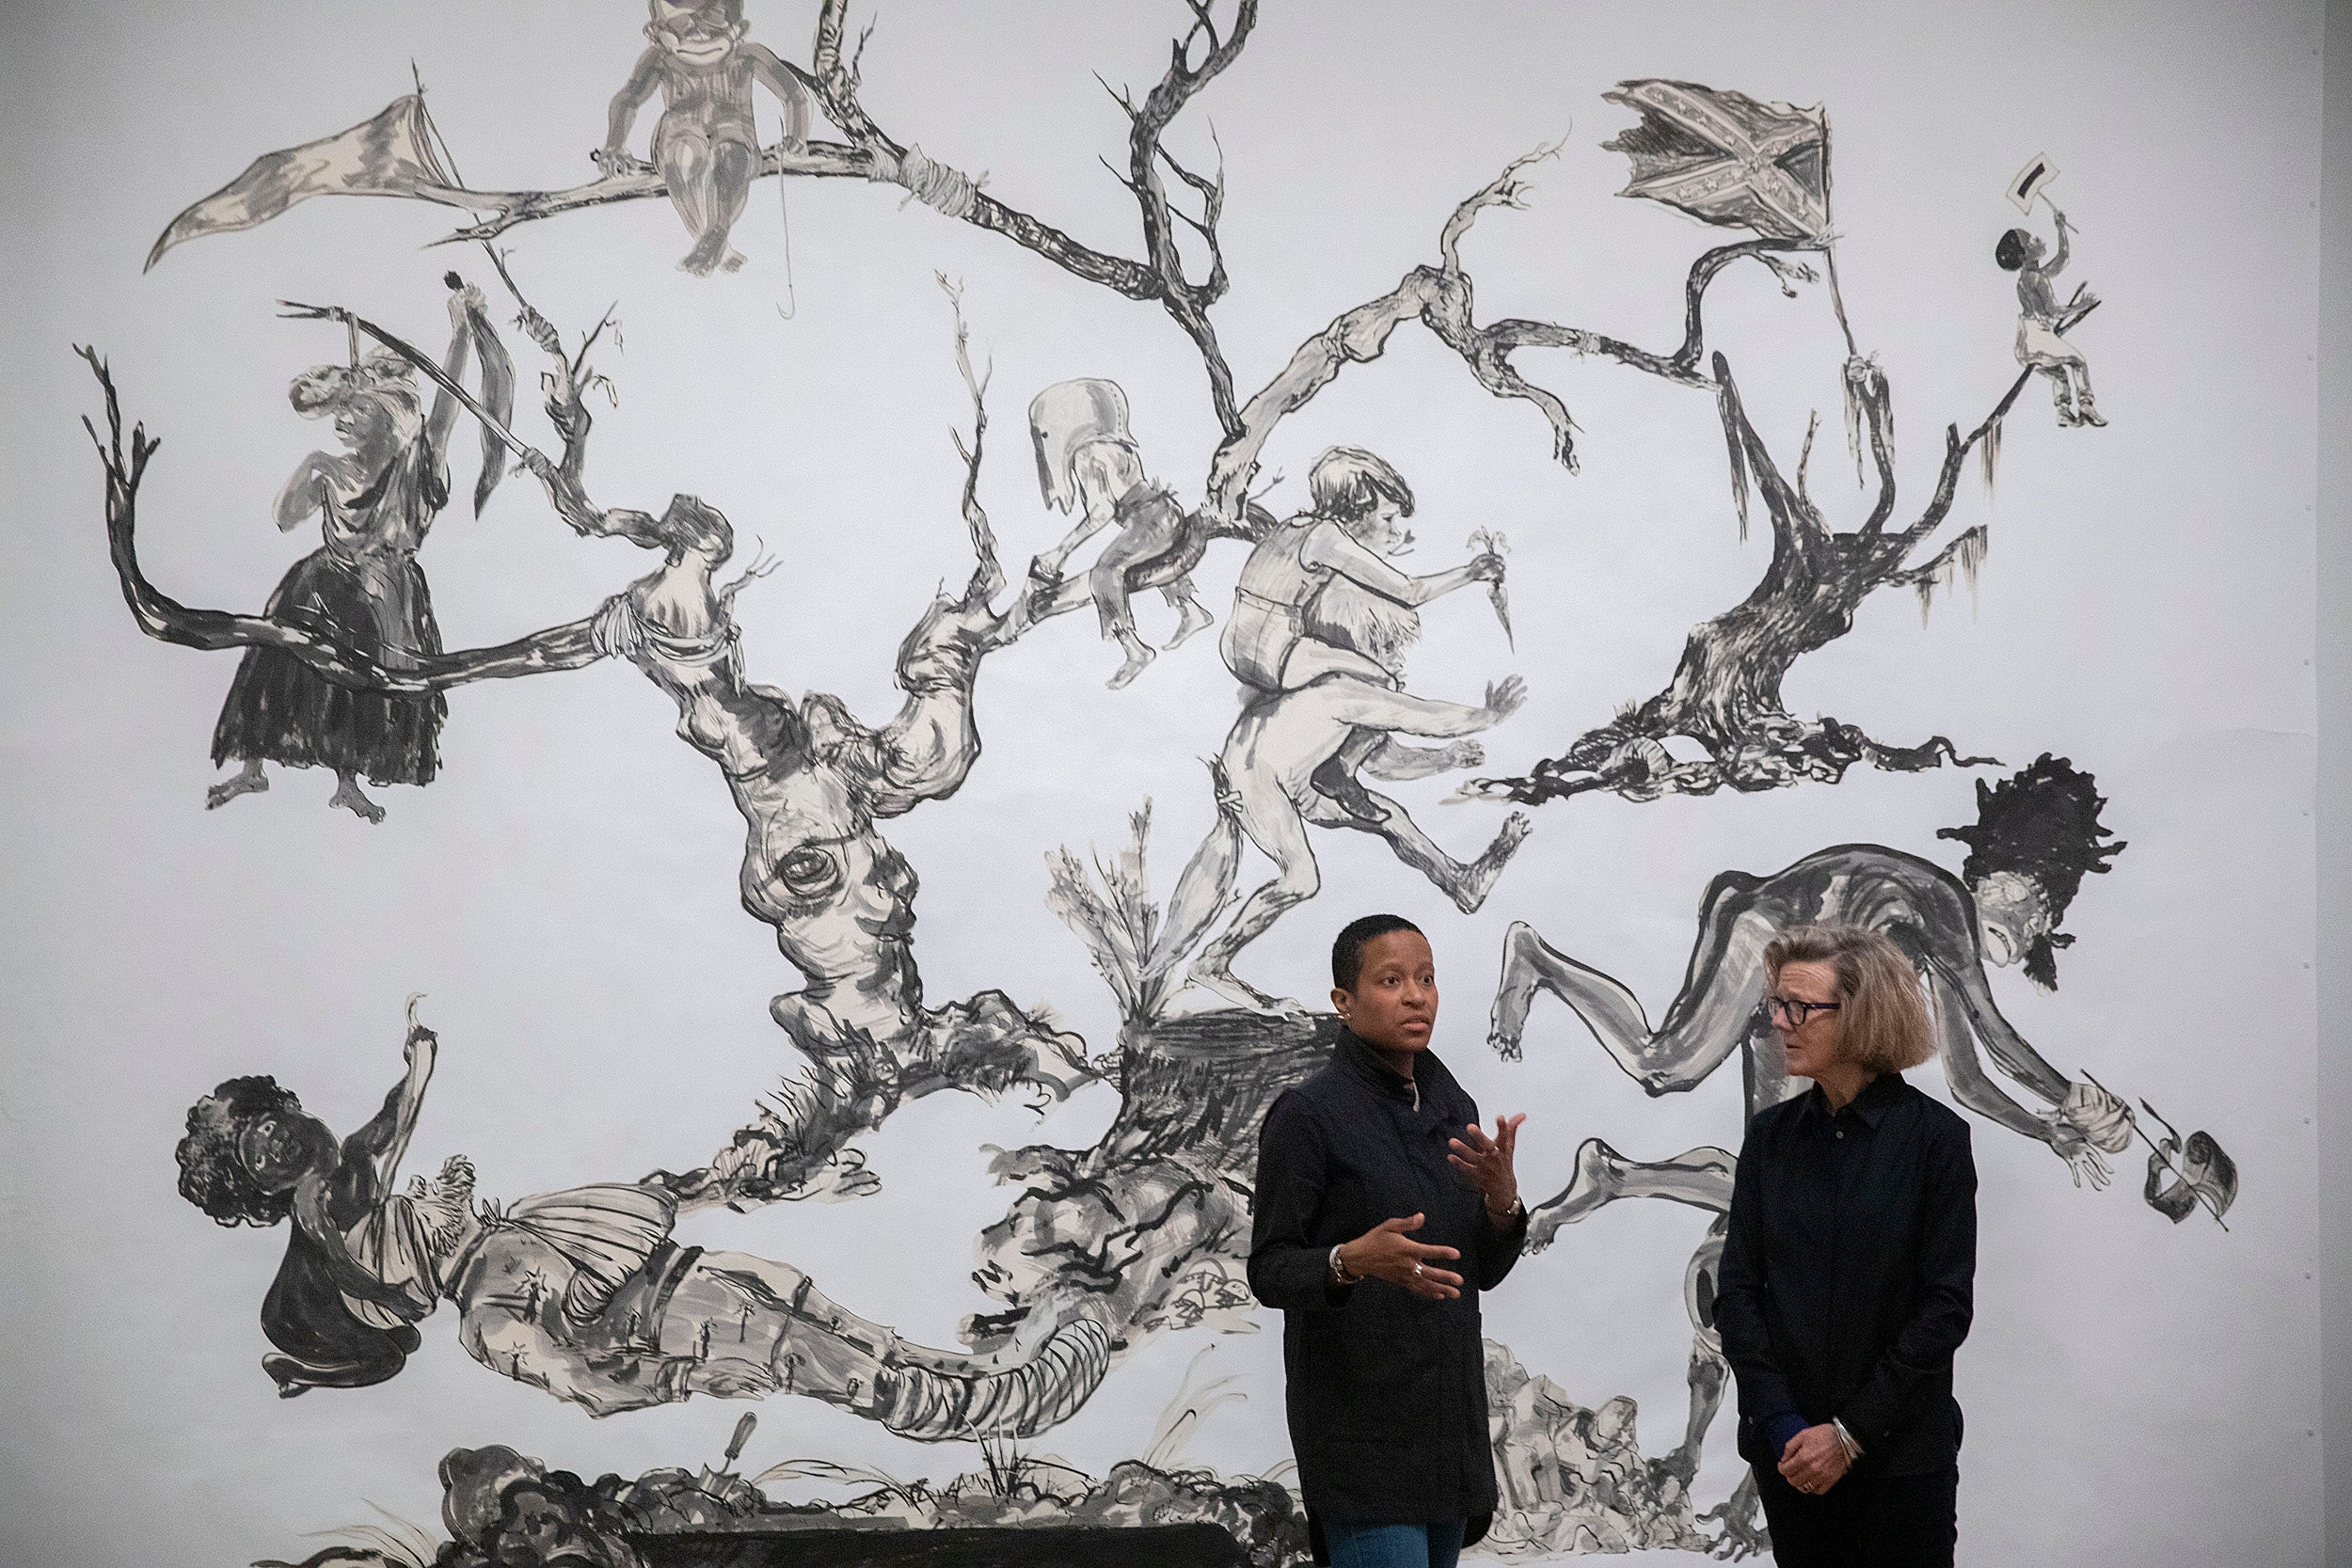 Chassidy Winestock and Mary Schneider Enriquez with Kara Walker's art U.S.A Idioms..